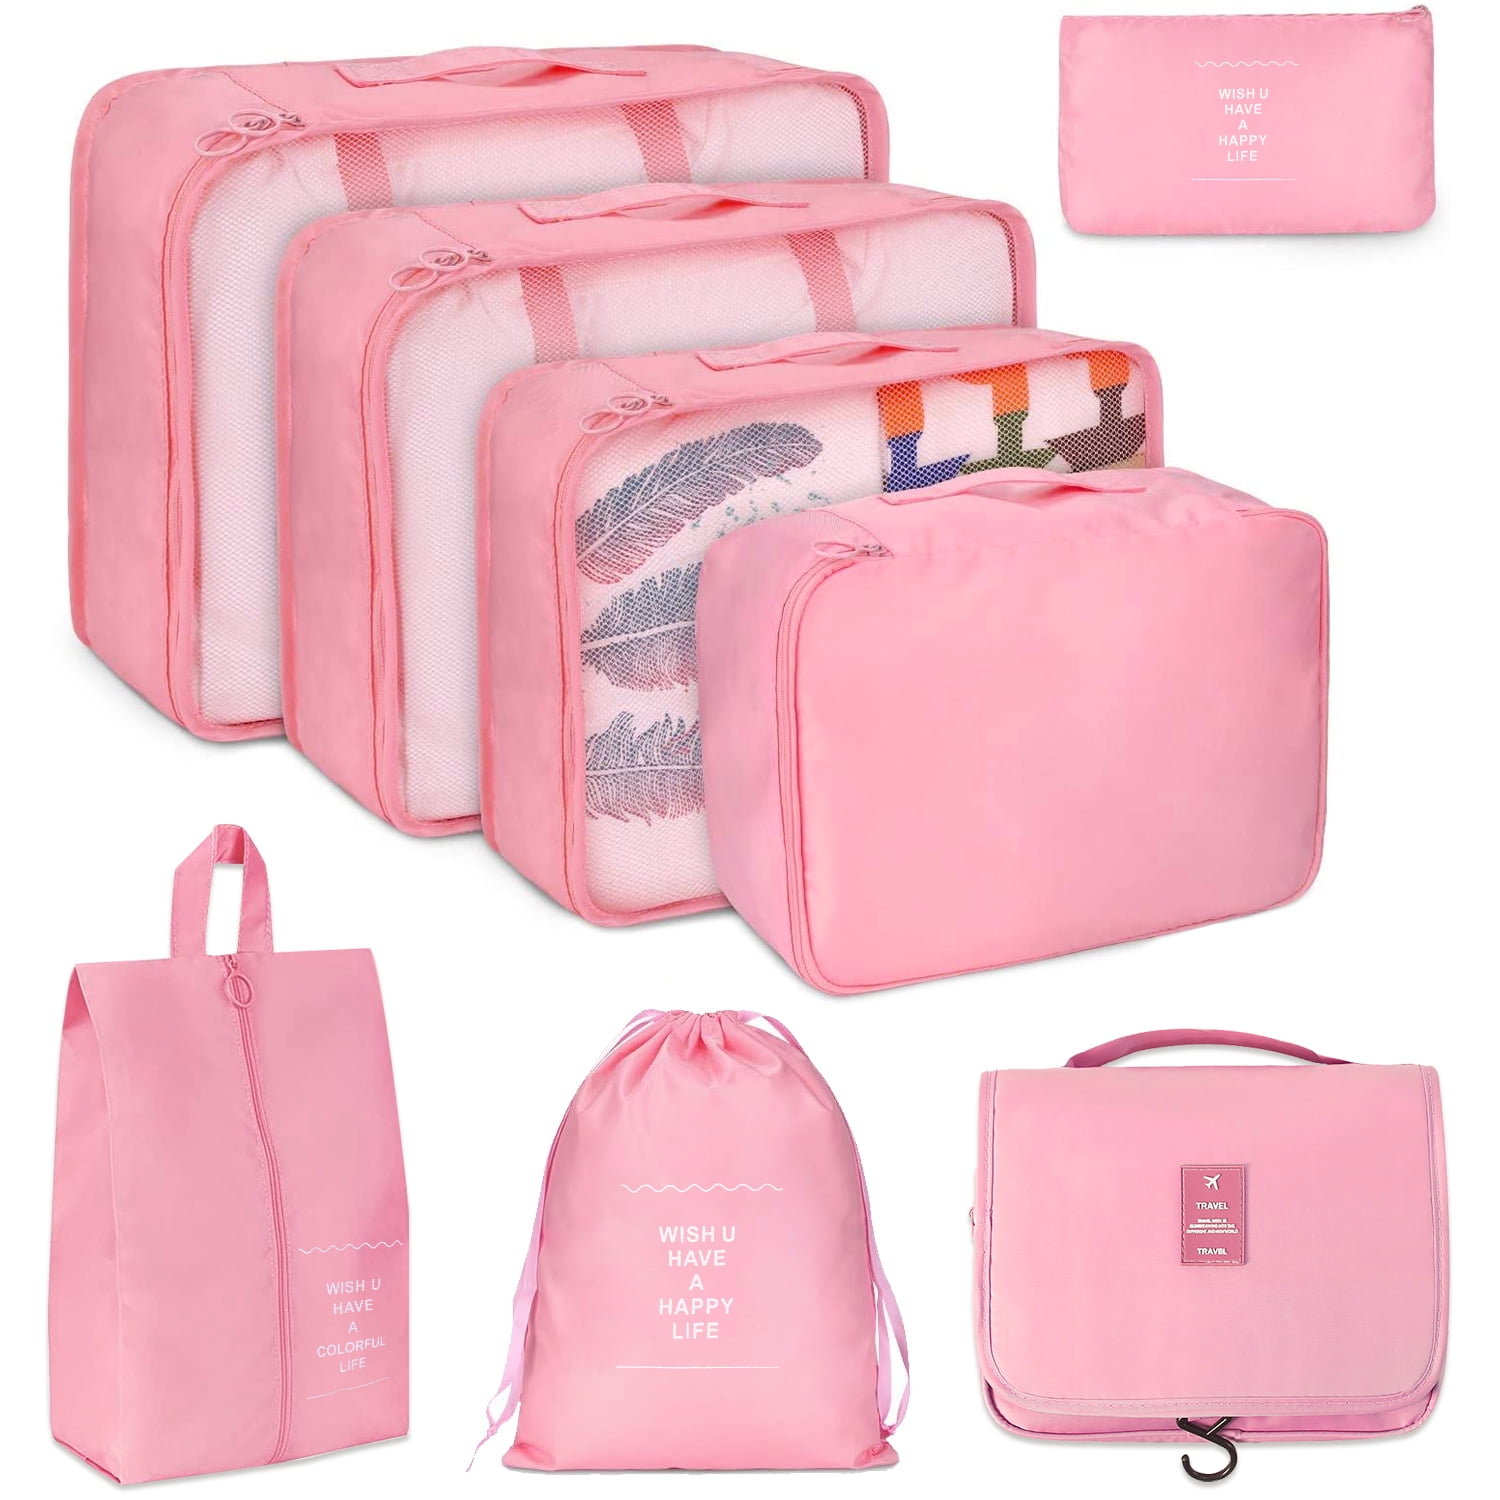 Packing Cubes for Suitcases, 8Pcs Travel Cubes Set for Packing Luggage ...